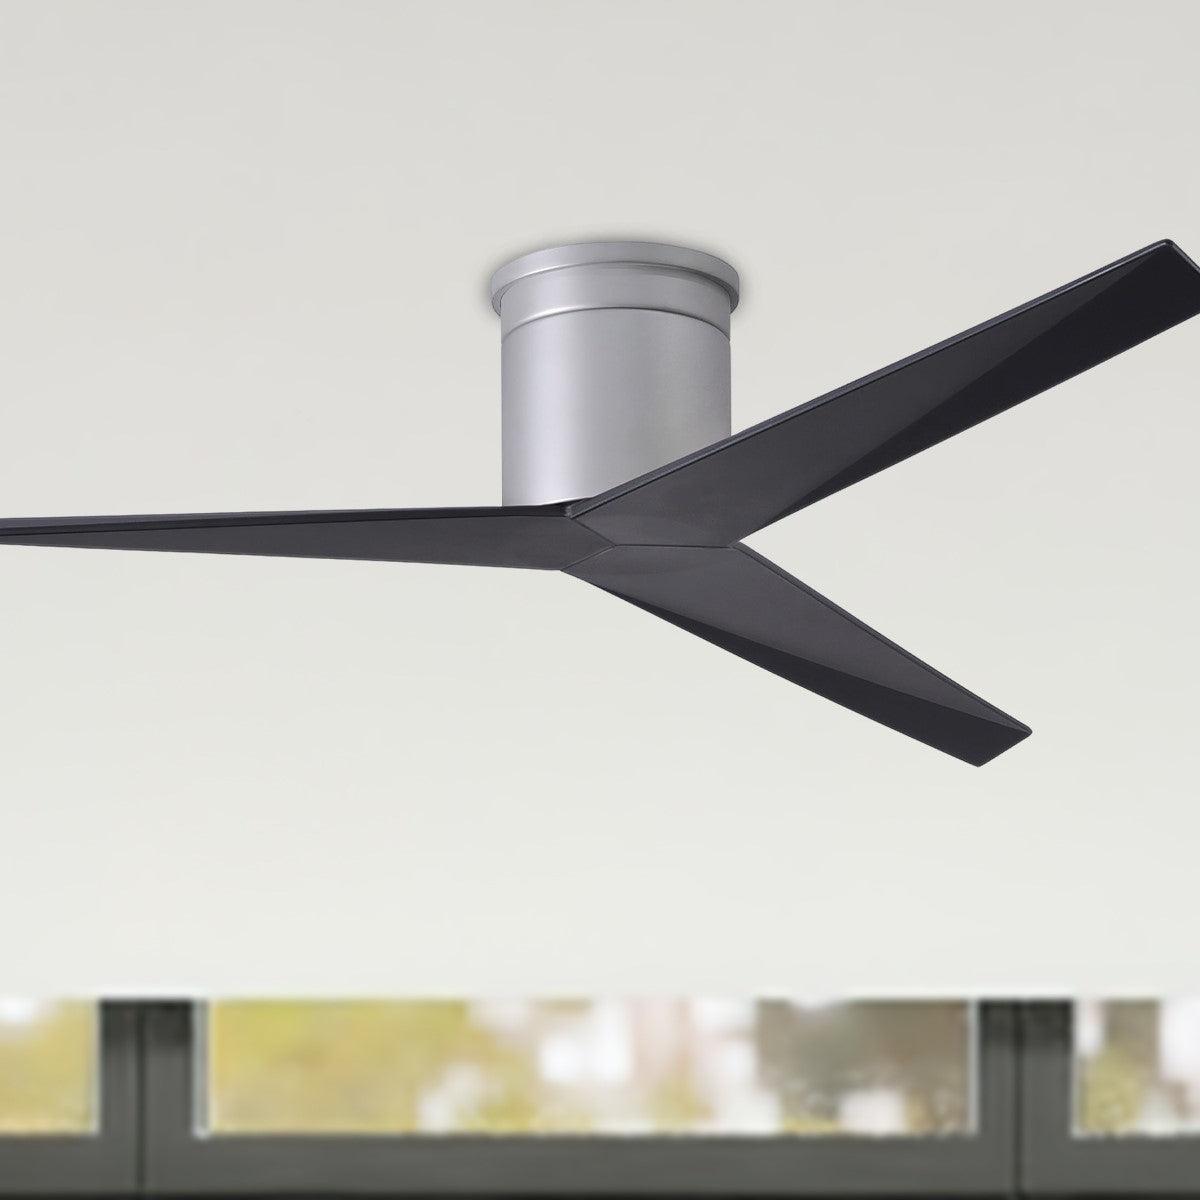 Eliza 56 Inch Low Profile Outdoor Ceiling Fan, Wall/Remote Control Included - Bees Lighting